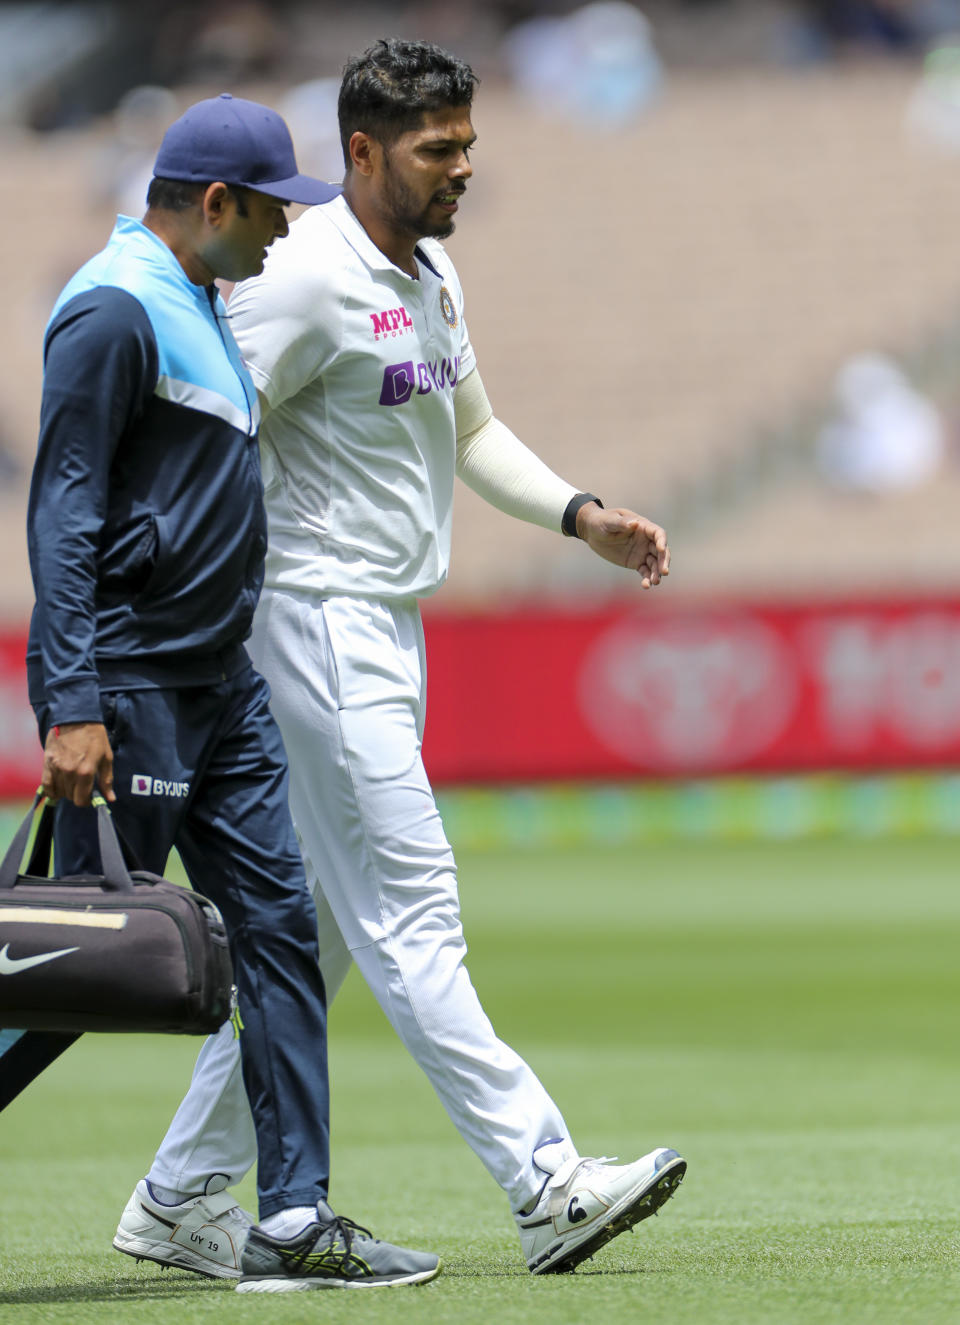 India's Umesh Yadav, right, walks from the field for treatment during play on day three of the second cricket test between India and Australia at the Melbourne Cricket Ground, Melbourne, Australia, Monday, Dec. 28, 2020. (AP Photo/Asanka Brendon Ratnayake)